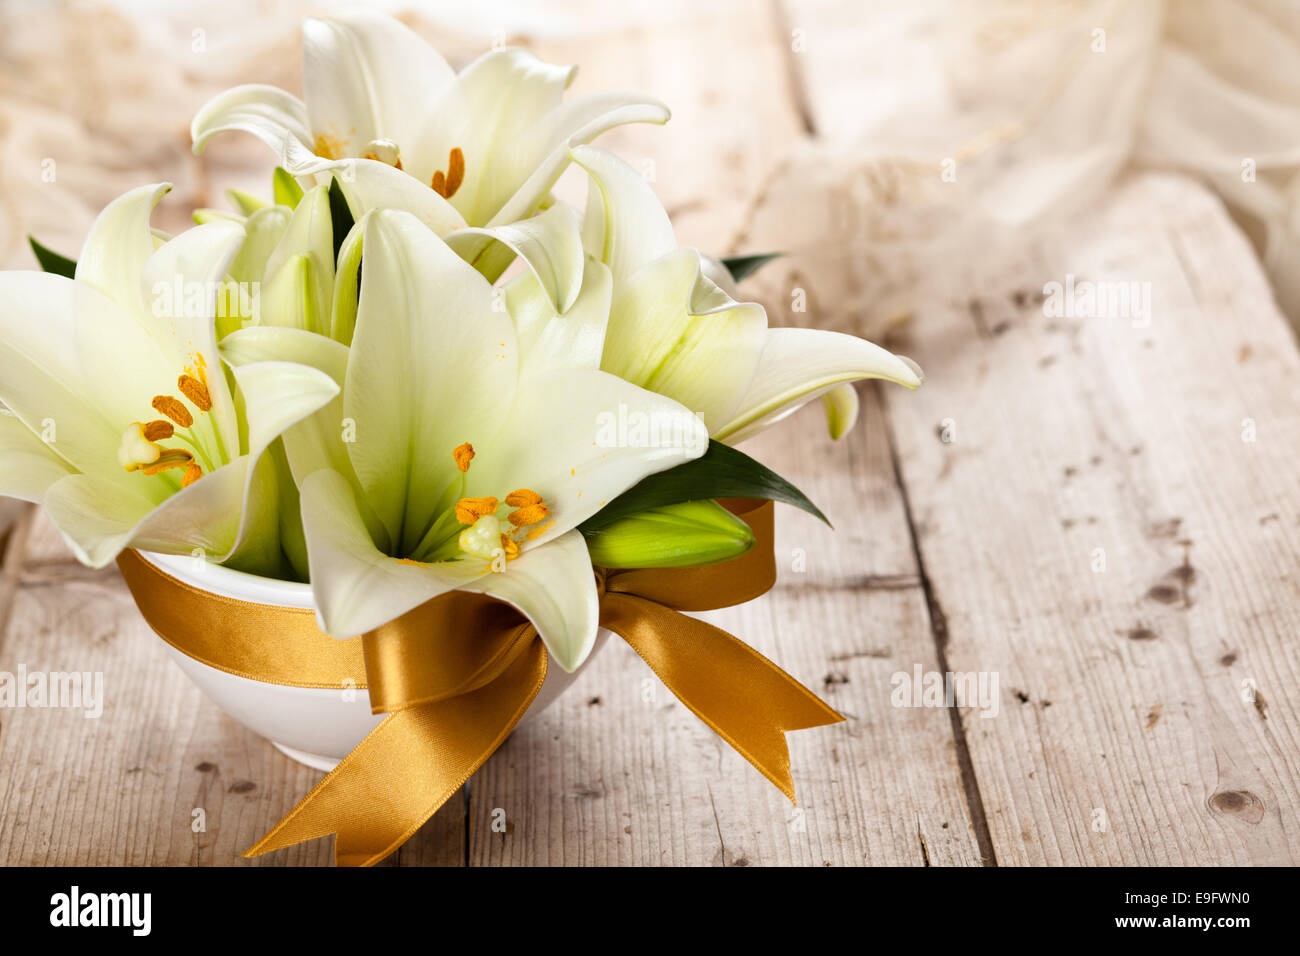 Closeup shot of white lilies on wooden table. Stock Photo